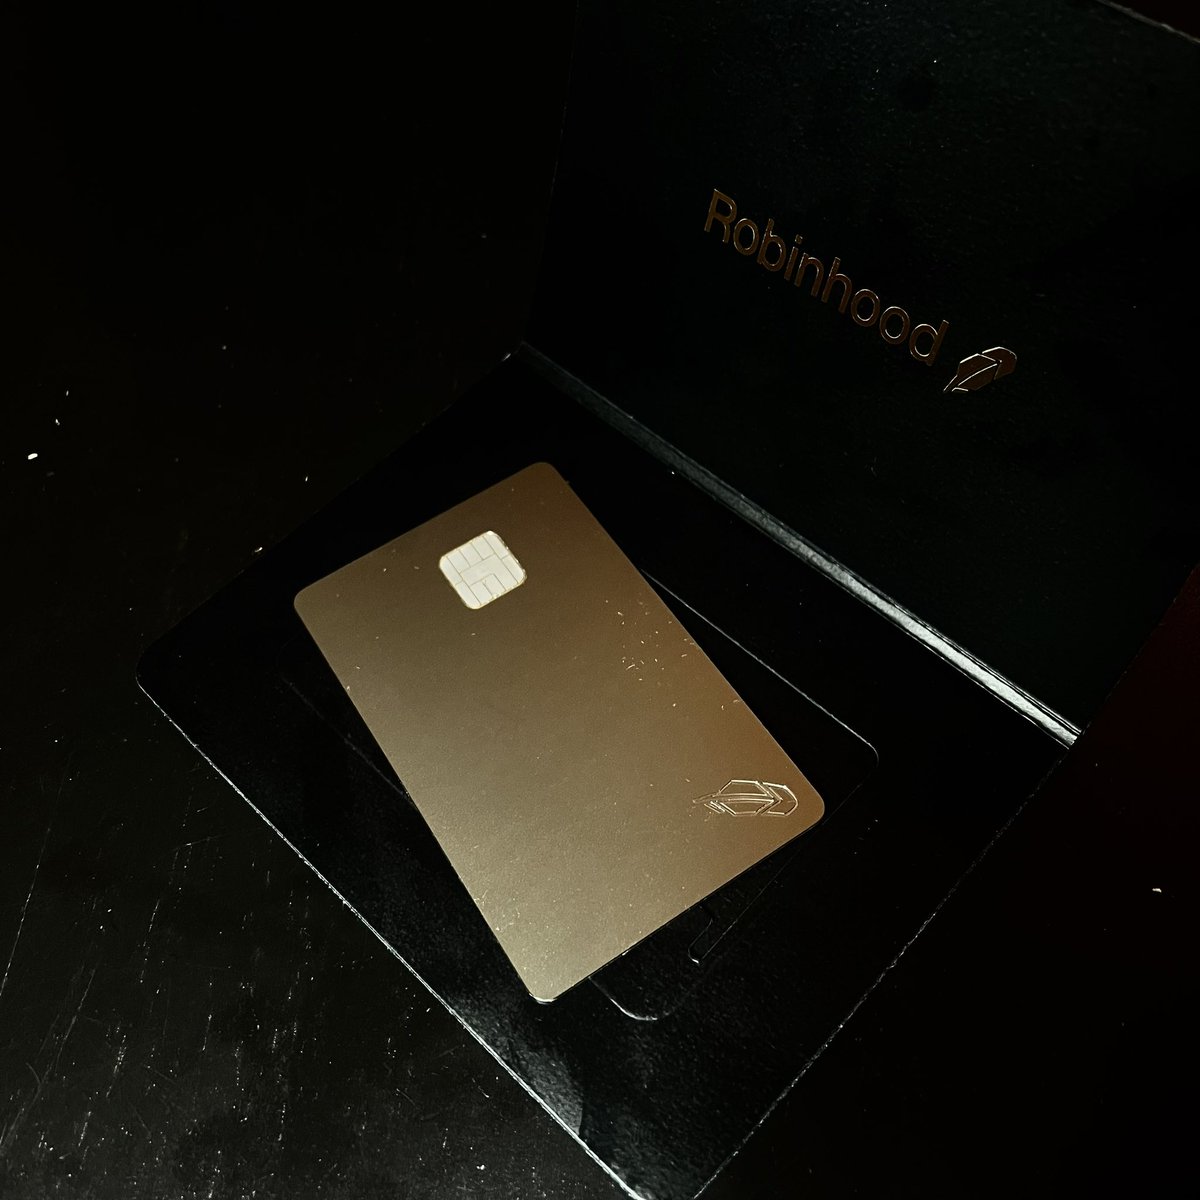 MY ROBINHOOD GOLD CARD HAS ARRIVED!

UNLIMITED 3% CASH BACK 

$HOOD LETS GO!!!! 

My annual expense spend is around $35k landing me $1,050 in cash back. Is this considered passive income? 😂